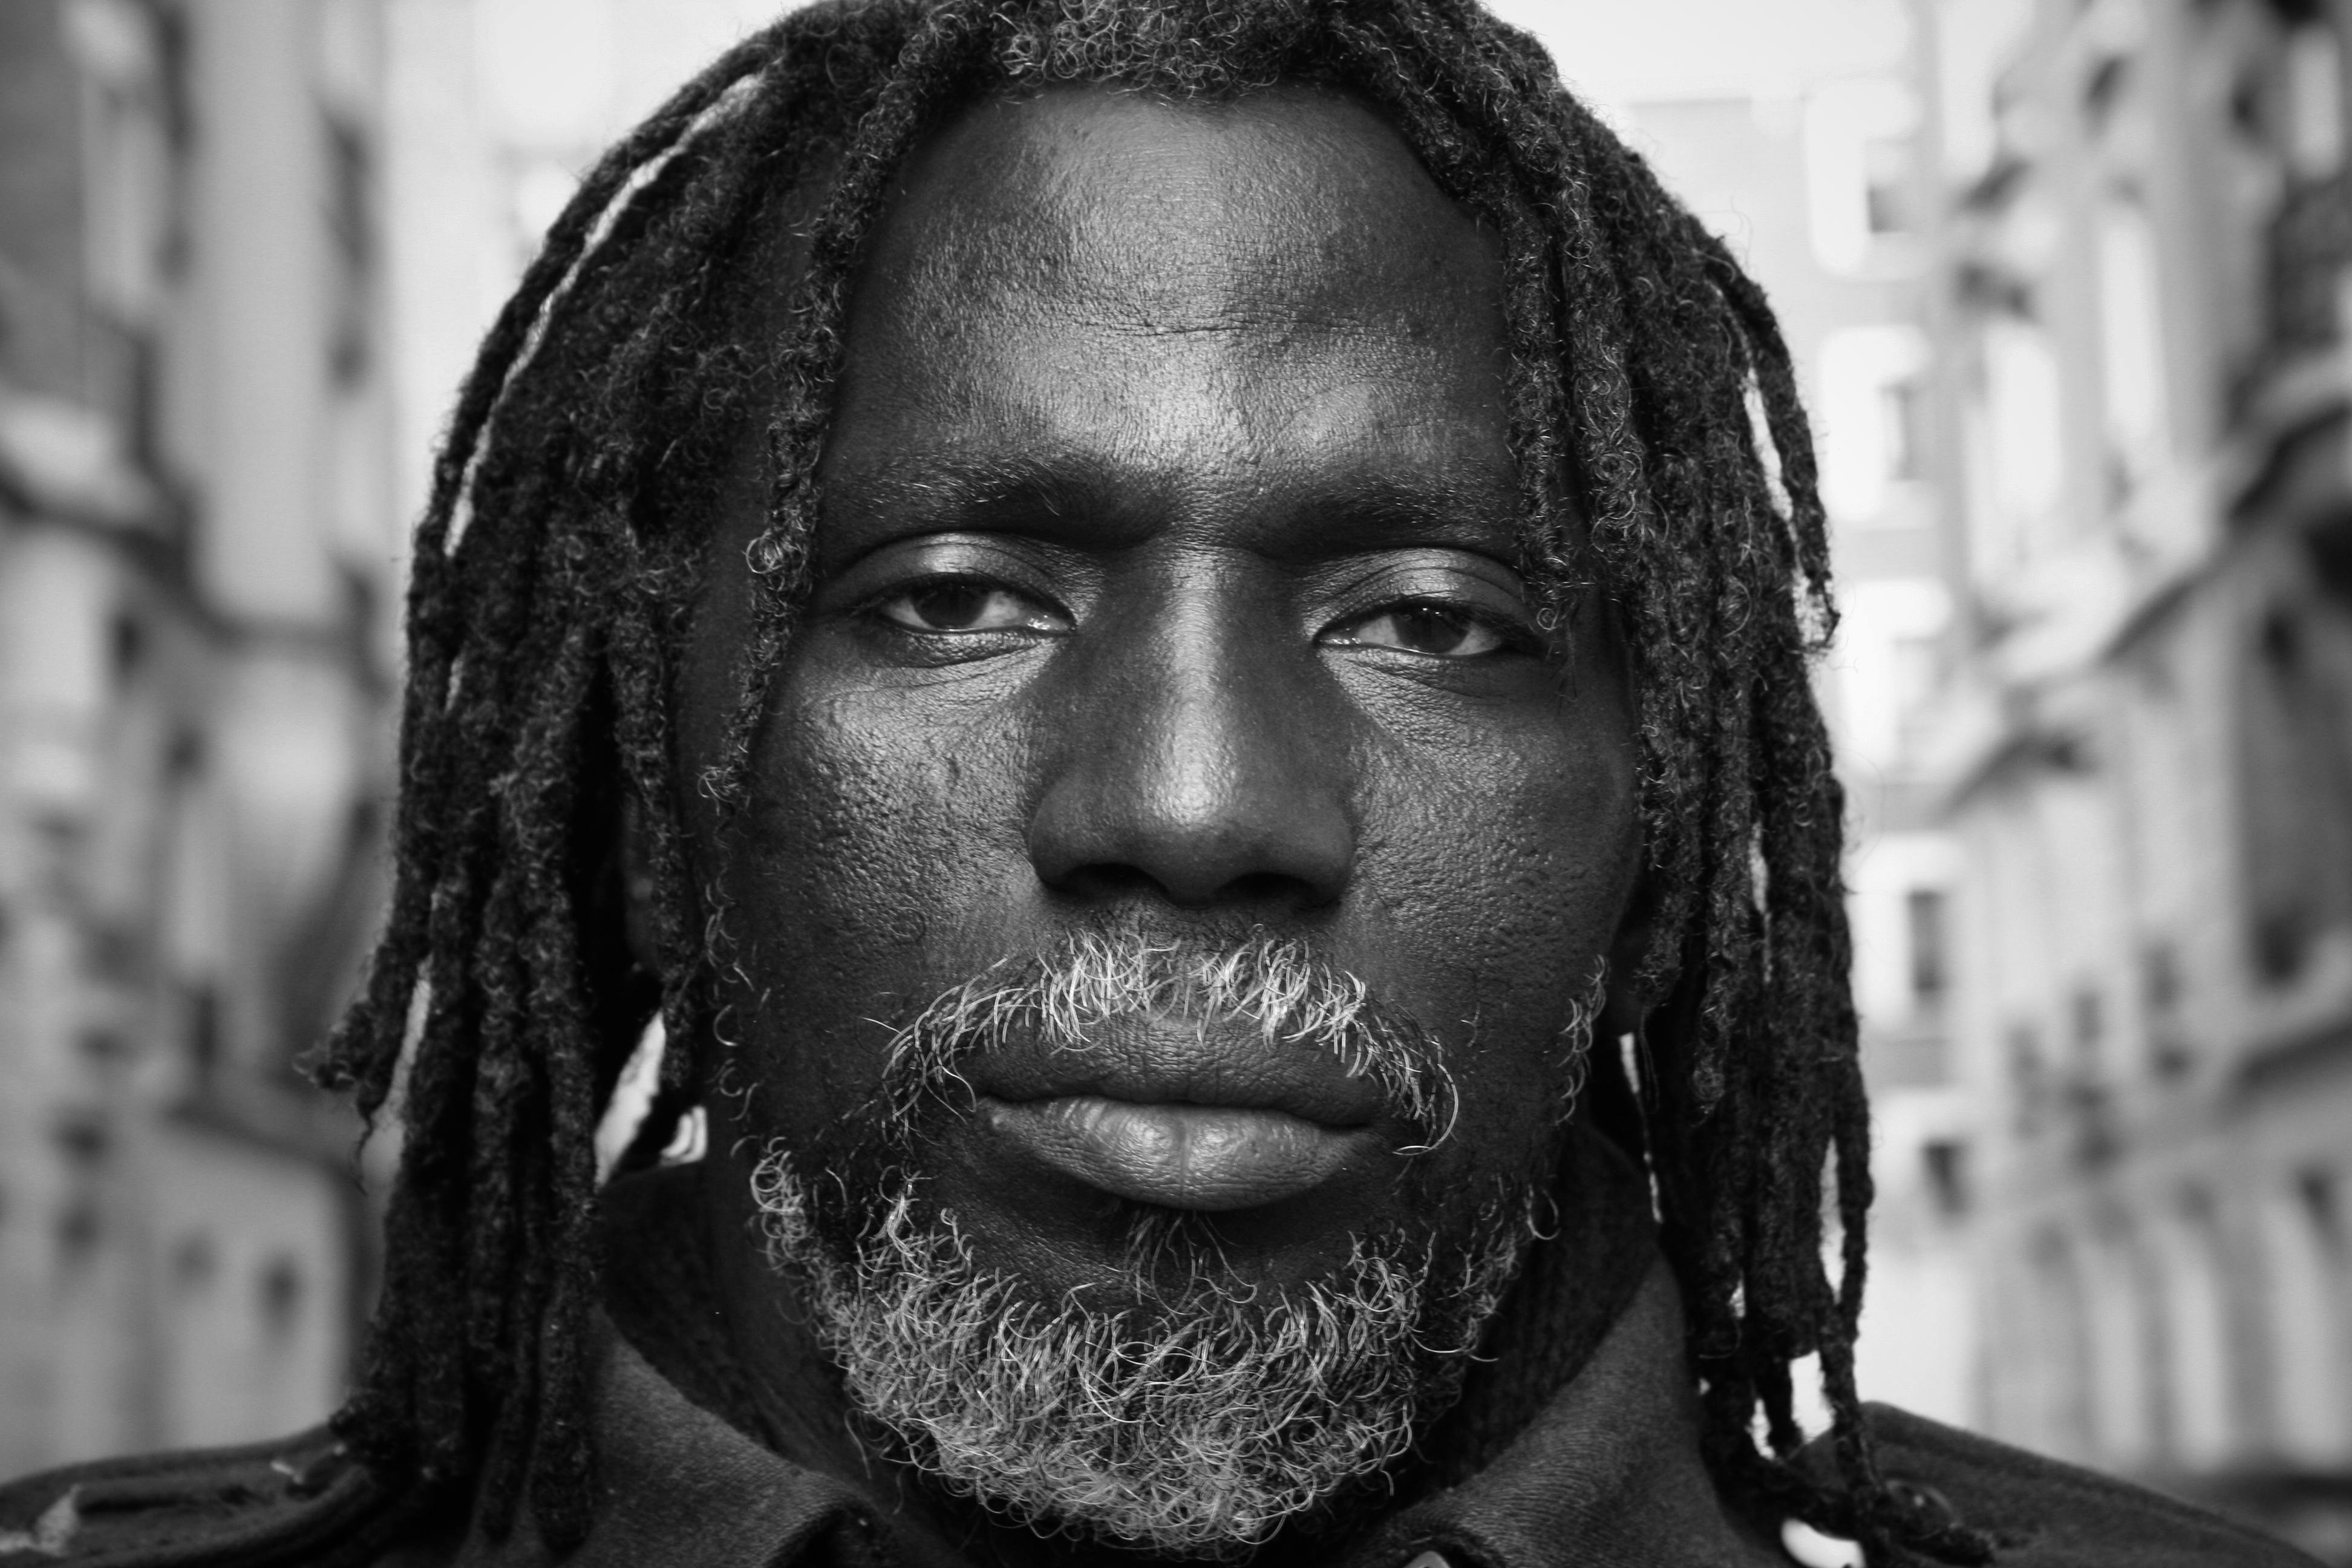 Tiken Jah Fakoly: “Through agriculture, Africa can rise again”